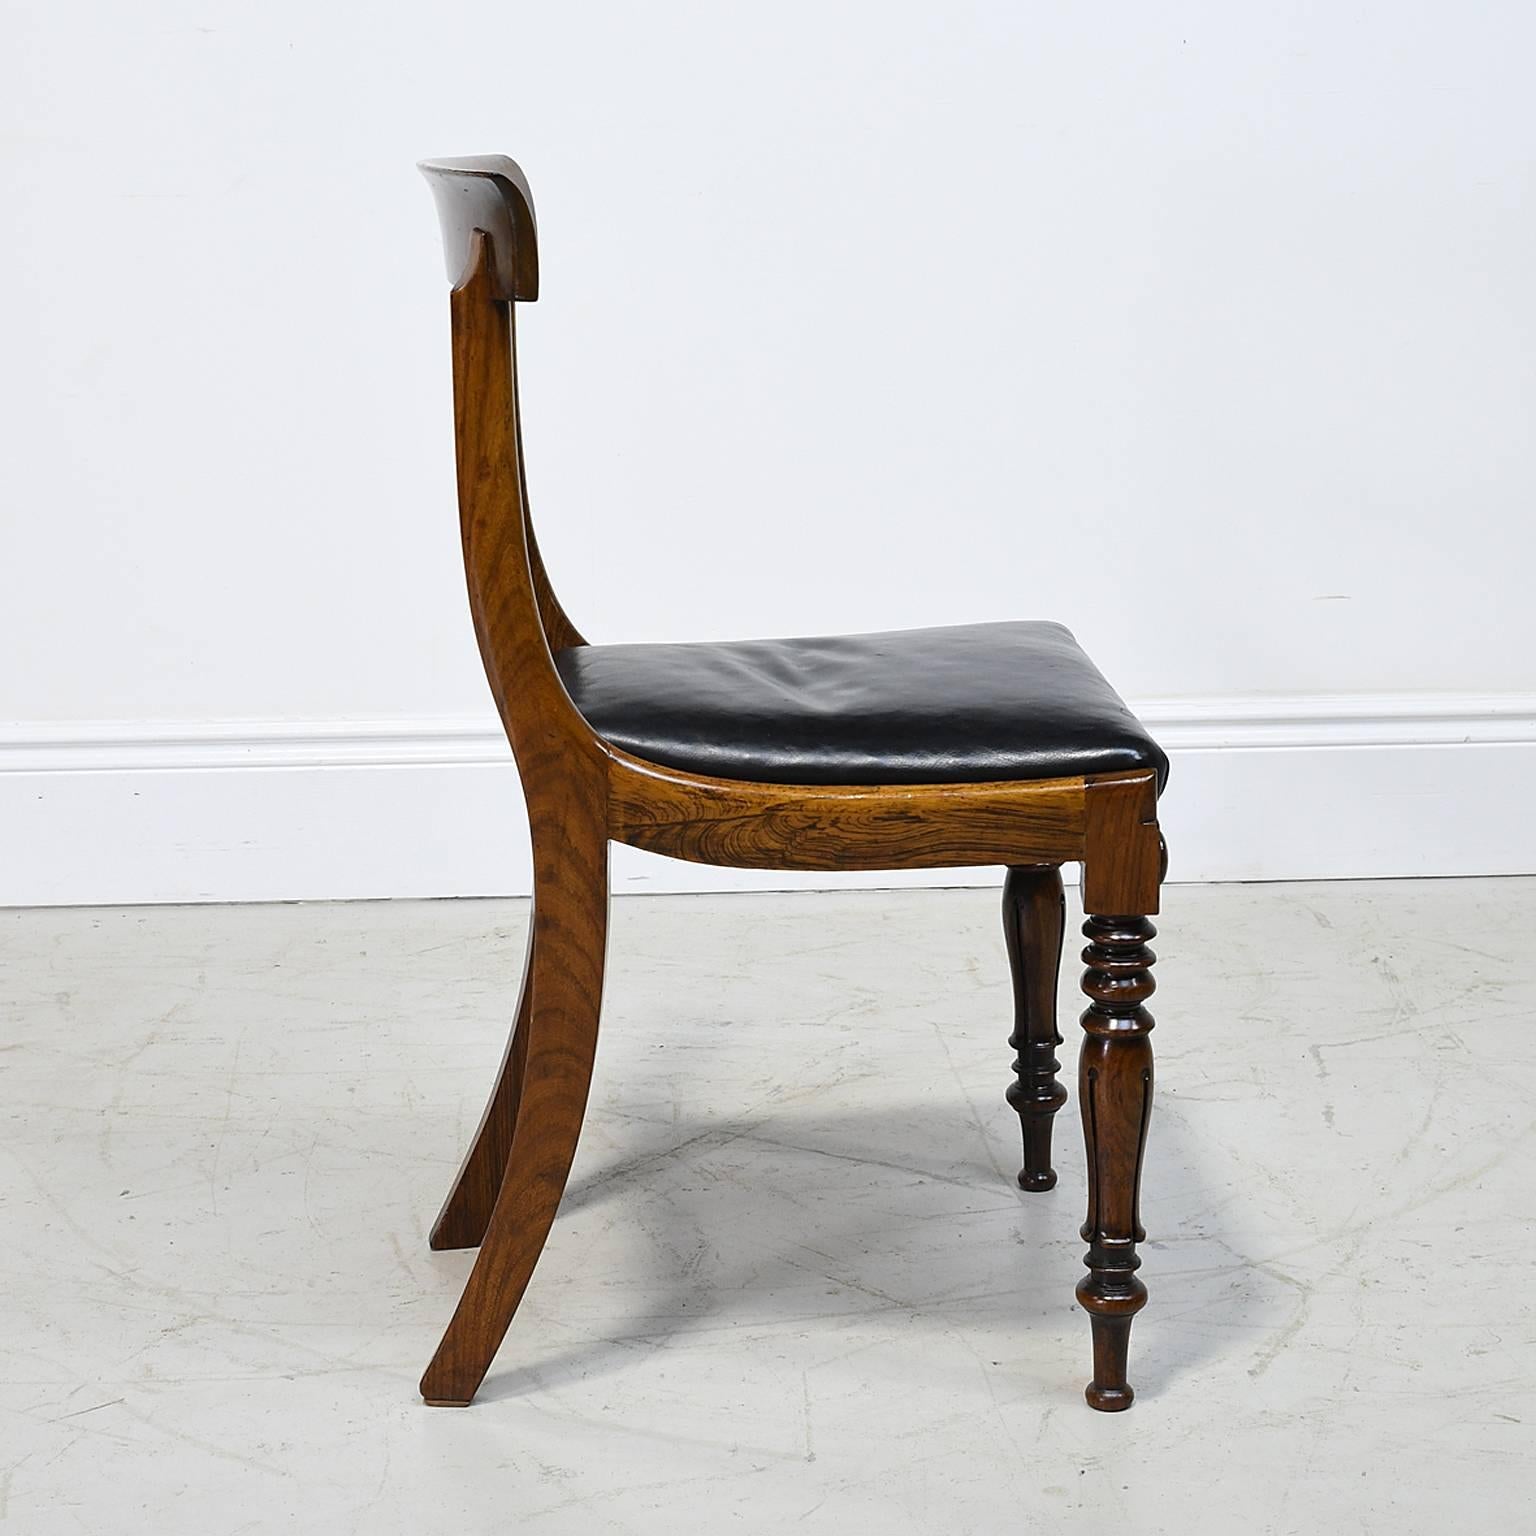 English Regency Rosewood Chair with Black Leather Upholstery, circa 1830 1